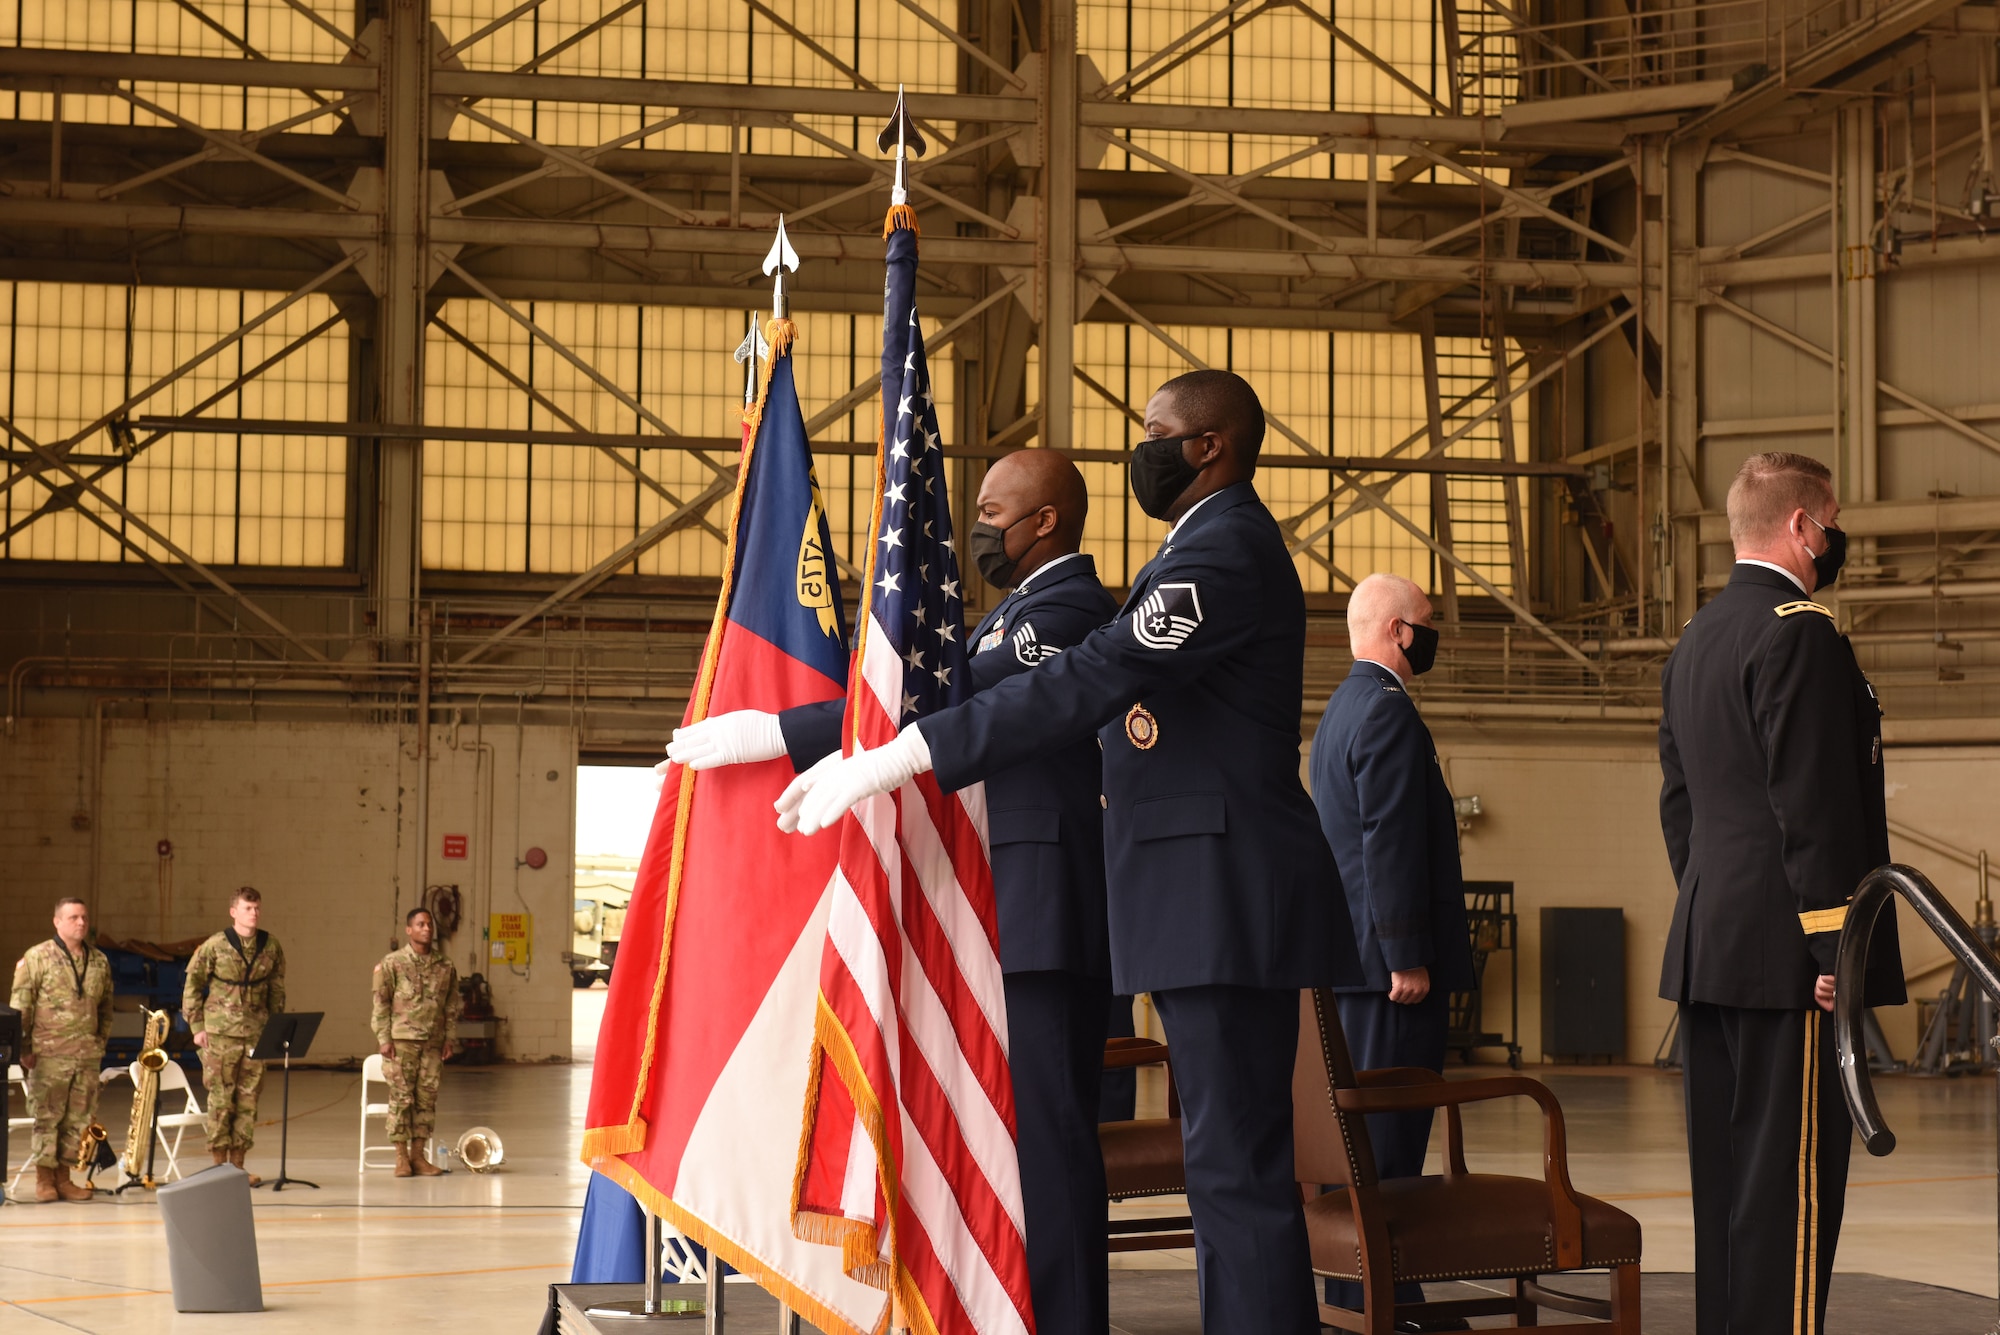 The 145th Airlift Wing Honor Guard posts the Colors during the promotion ceremony of U.S. Air Force Col. Allan R. Cecil, North Carolina National Guard Chief of Staff, held at the North Carolina Air National Guard Base, Charlotte Douglas International Airport, July 18, 2020. Family, friends, and guard members gather to watch Col. Cecil pin on the rank of Brigadier General.